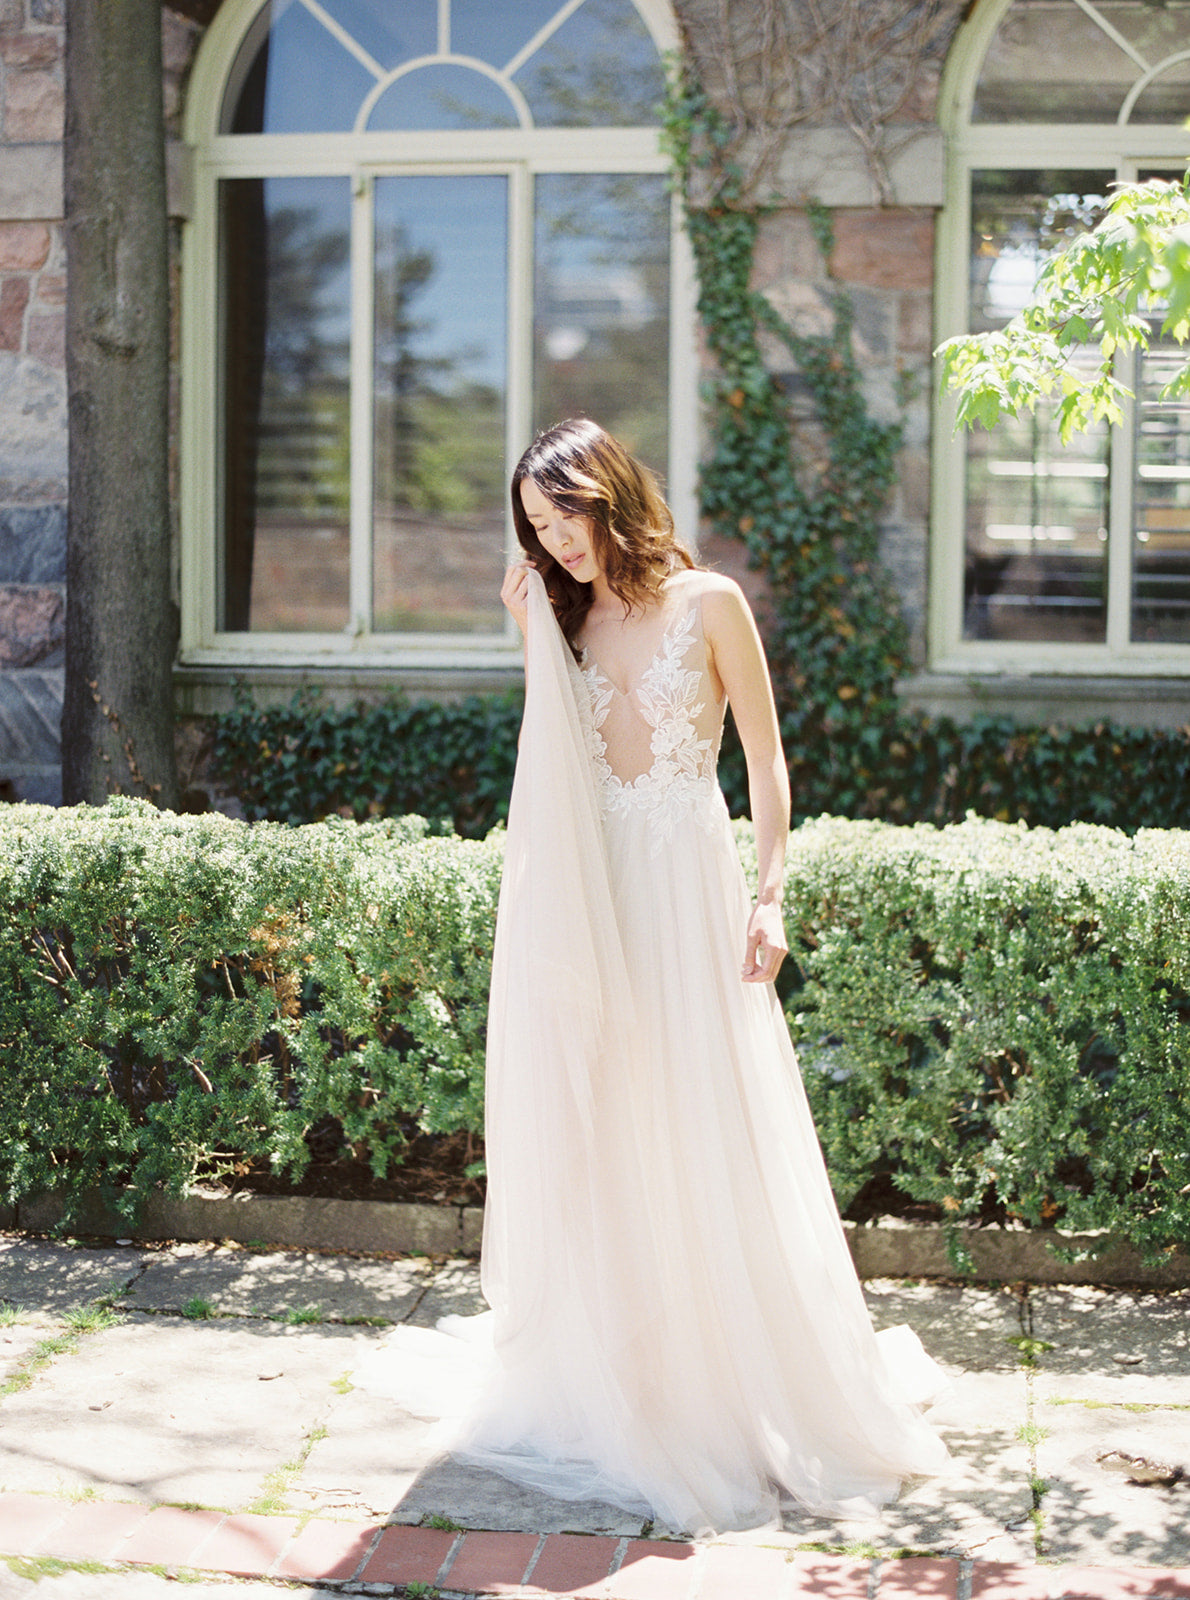 AMY | Floral Wedding Dress with Soft Tulle Skirt | Noon on the Moon